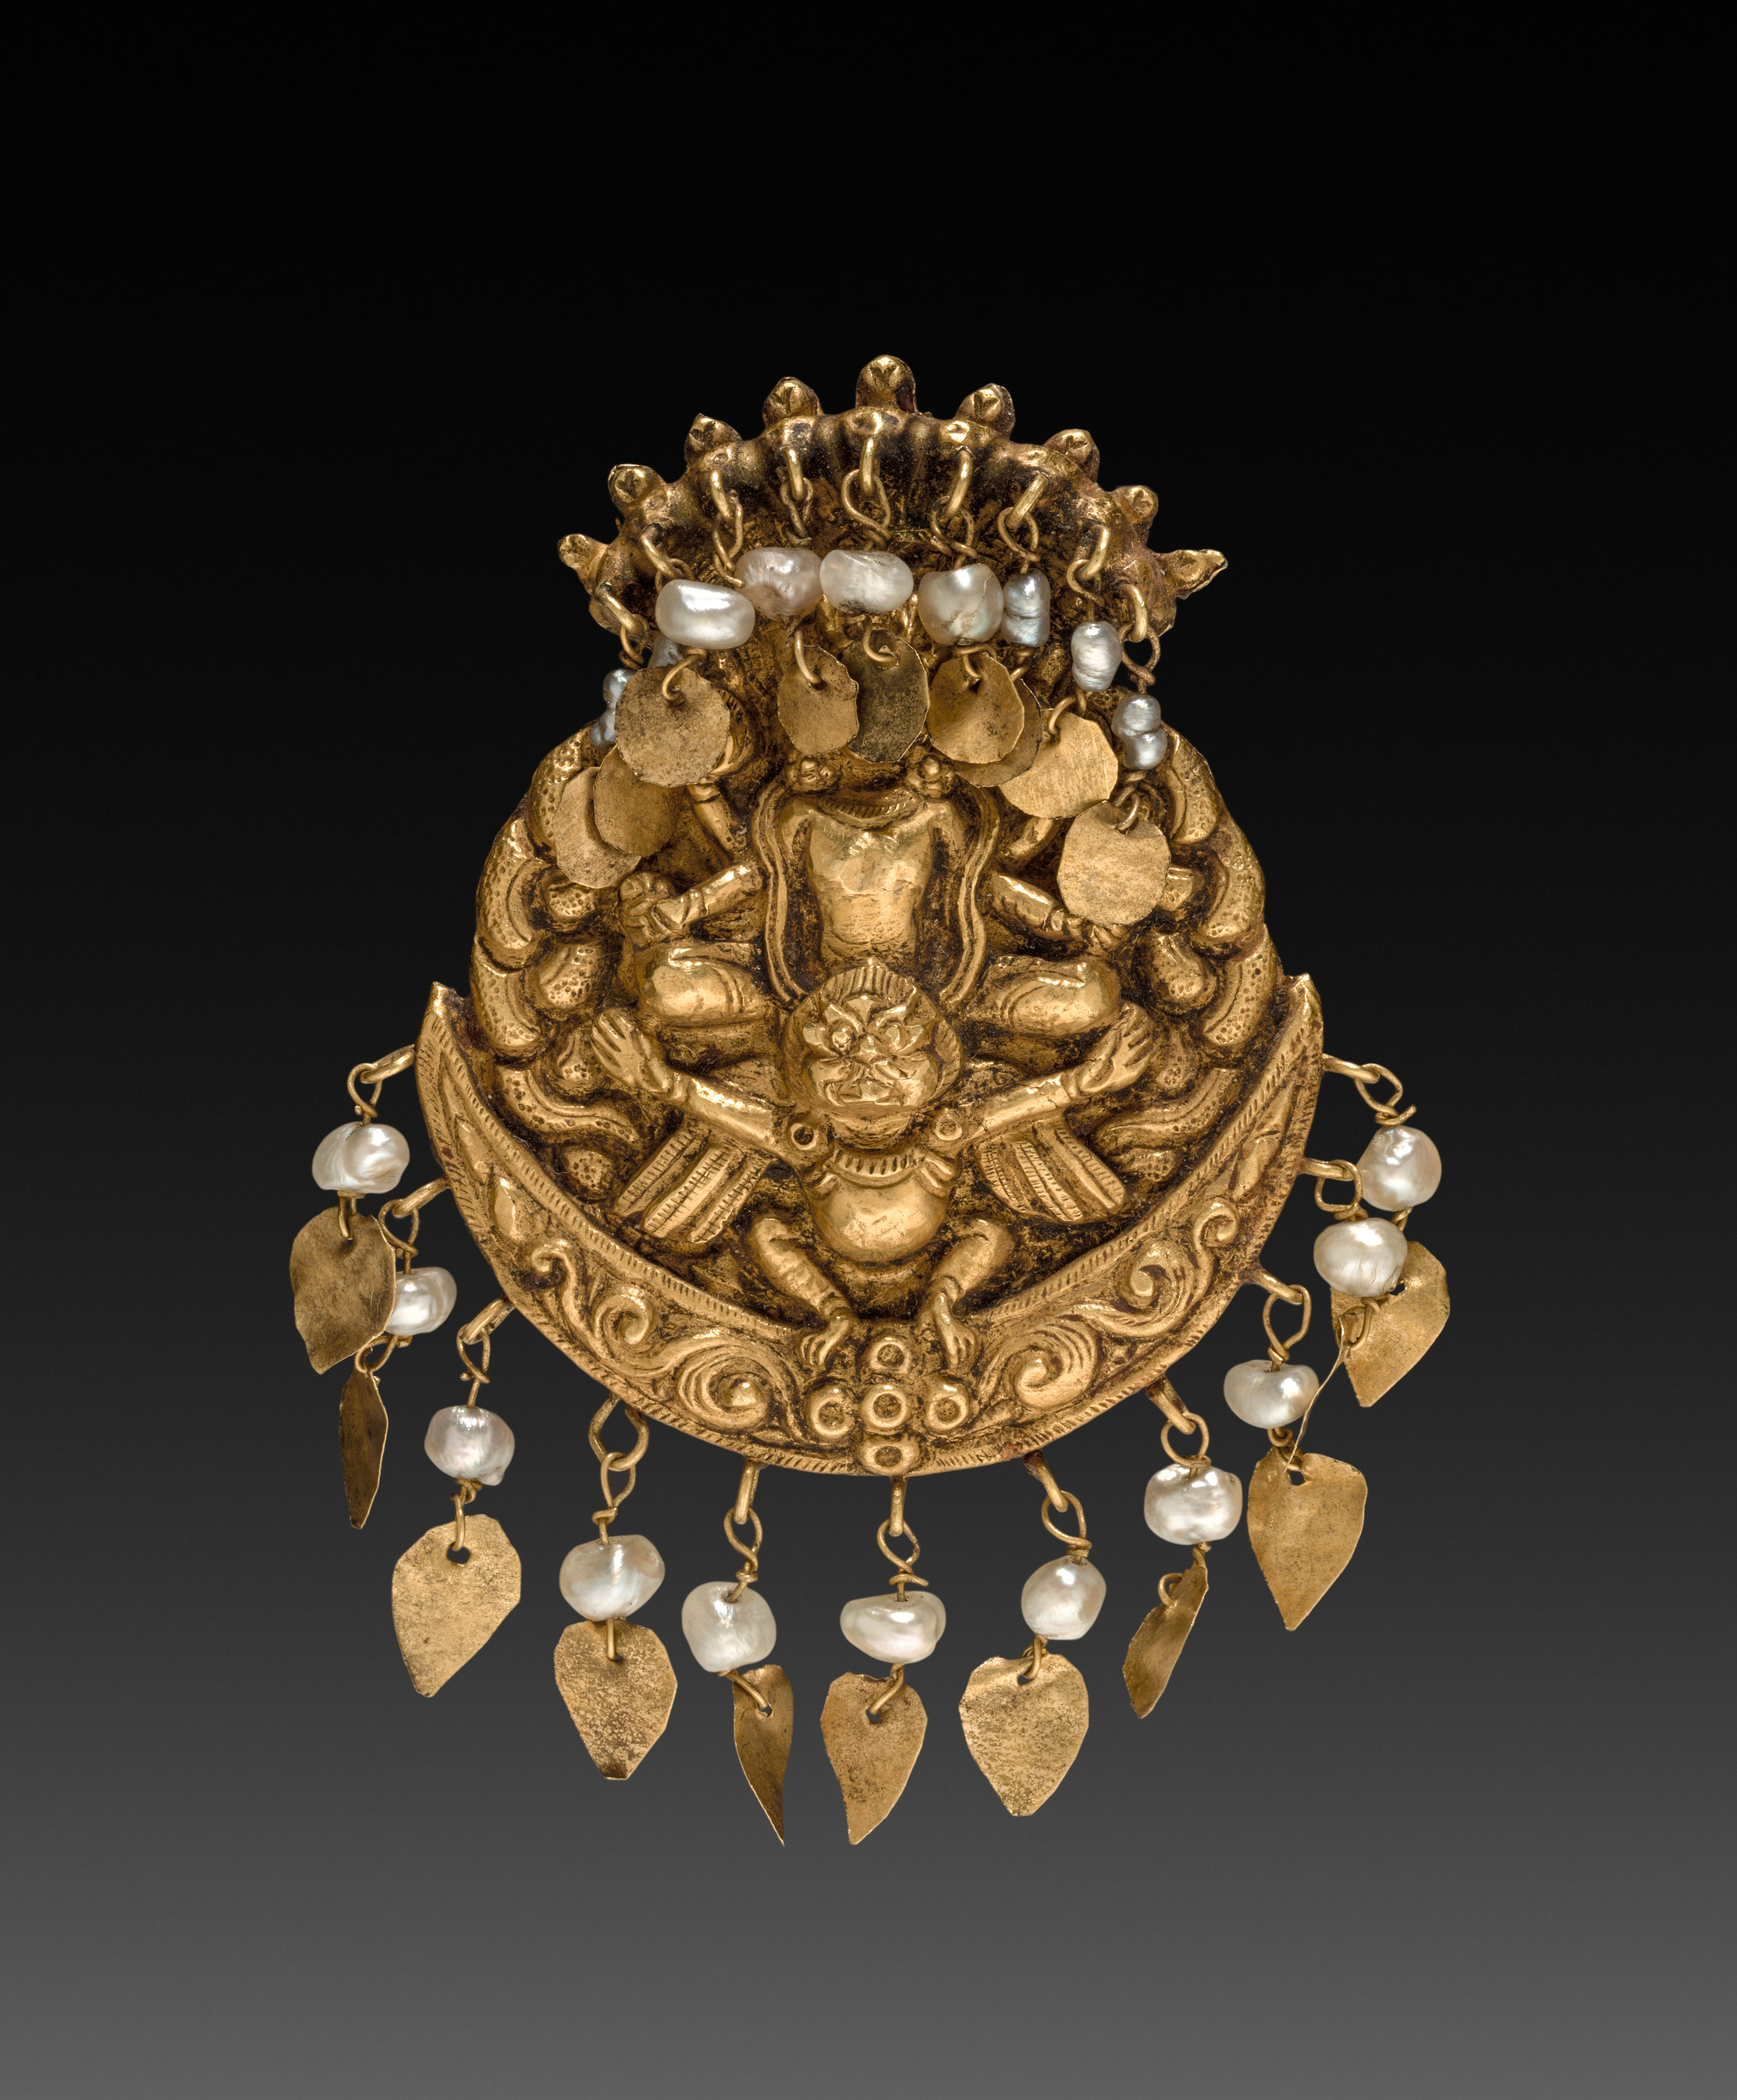 Earring with Four-Armed Vishnu Riding Garuda with Nagas (serpent divinities)